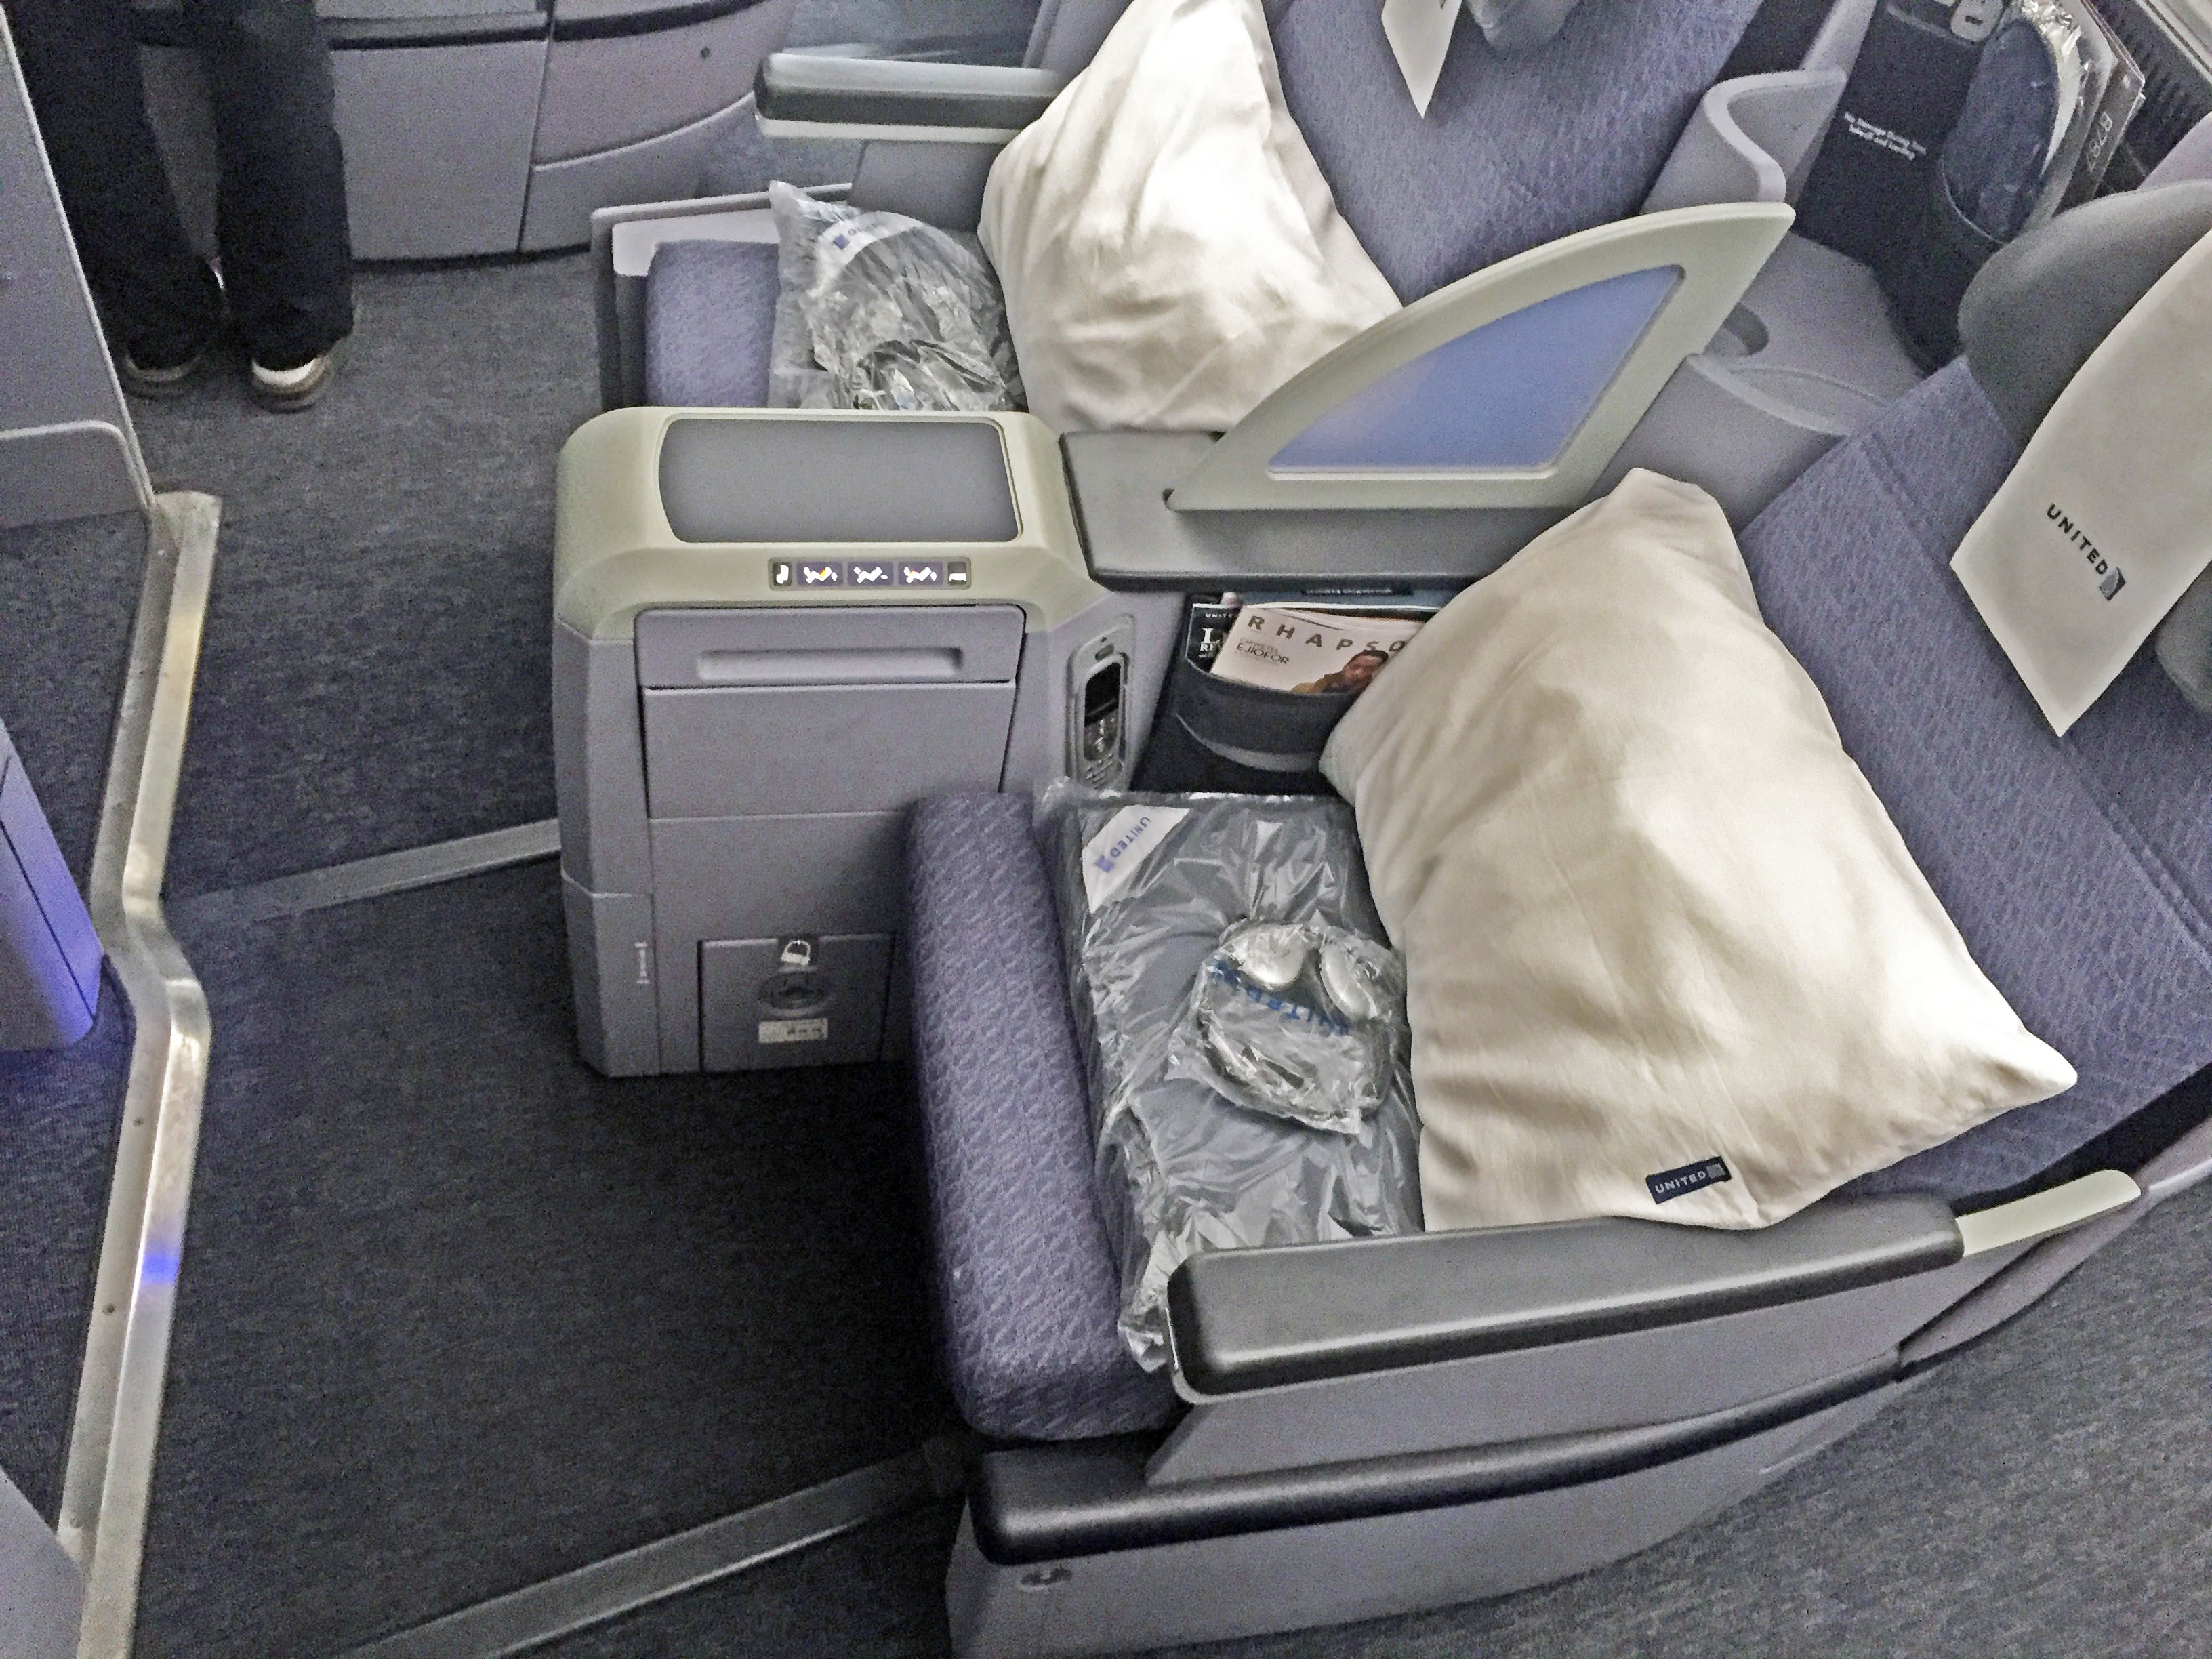 What is the difference between United Airlines first-class and economy seating?